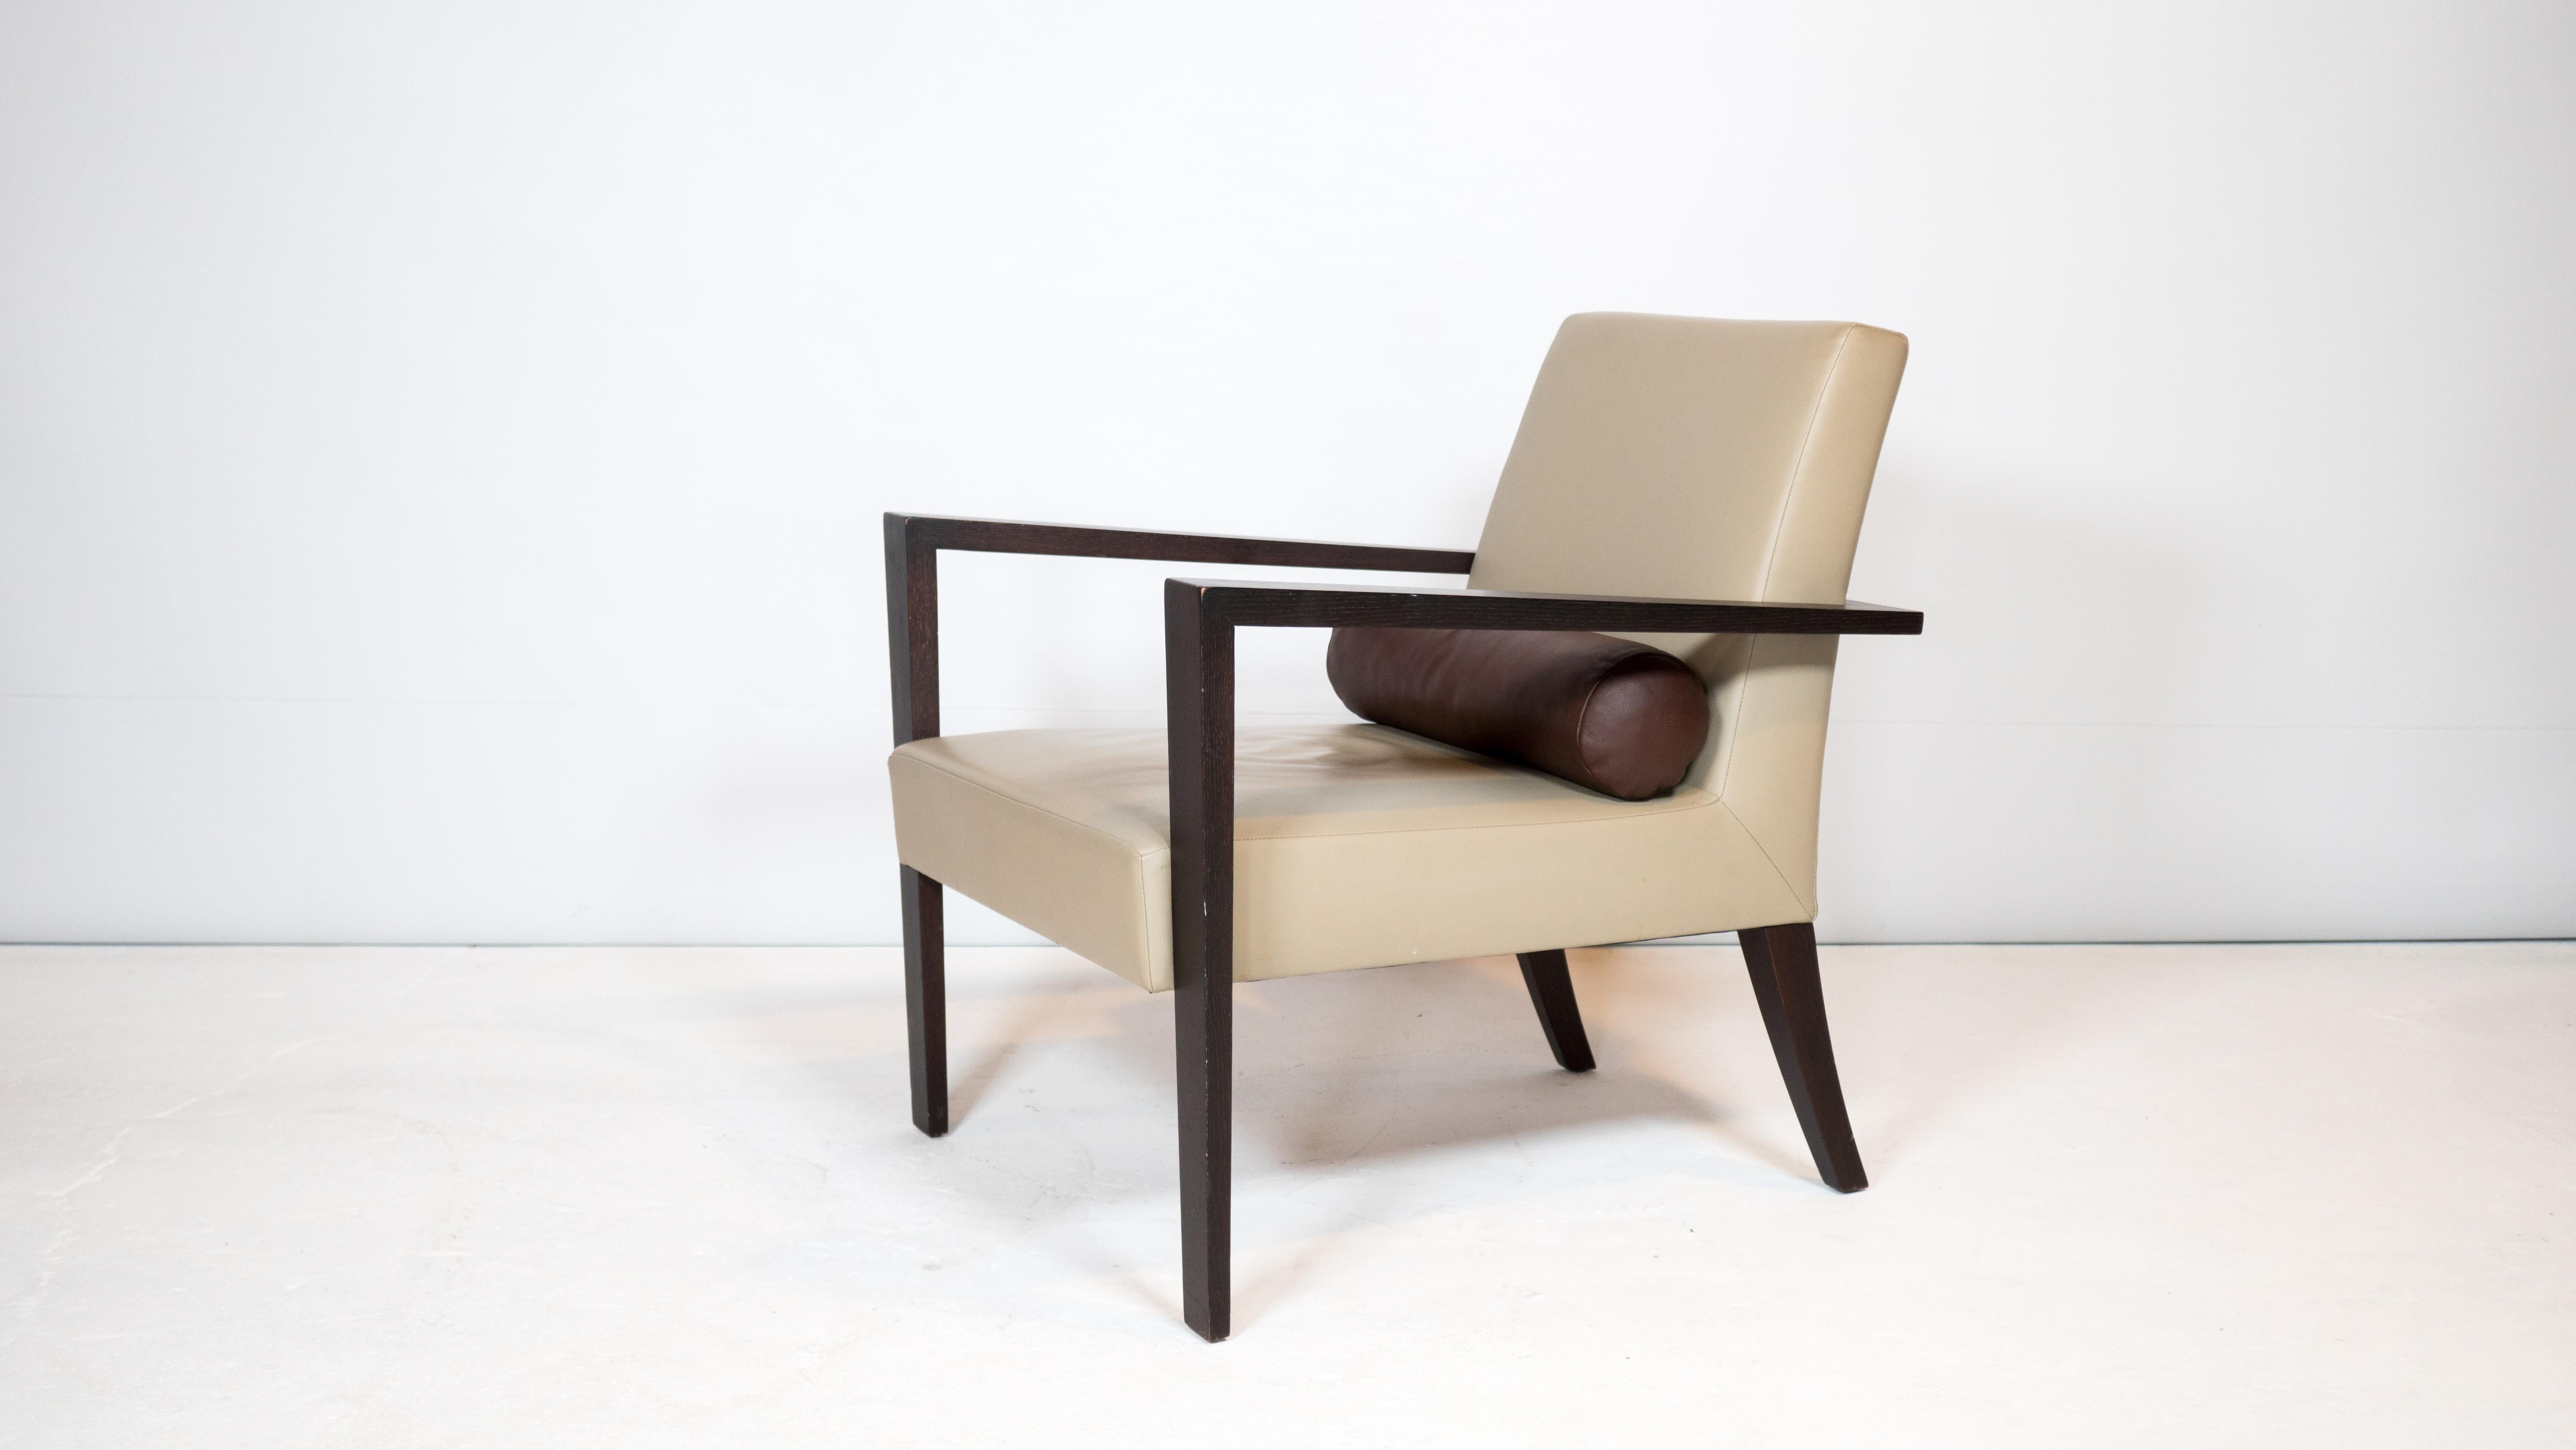 Ligne Roset 'French Line' chair by Didier Gomez, circa 1990s. Modern design with angular silhouette. Solid wood frame and buttery beige leather seat. Down filled polochon. Good condition. Manufacturer label present. Made in France.